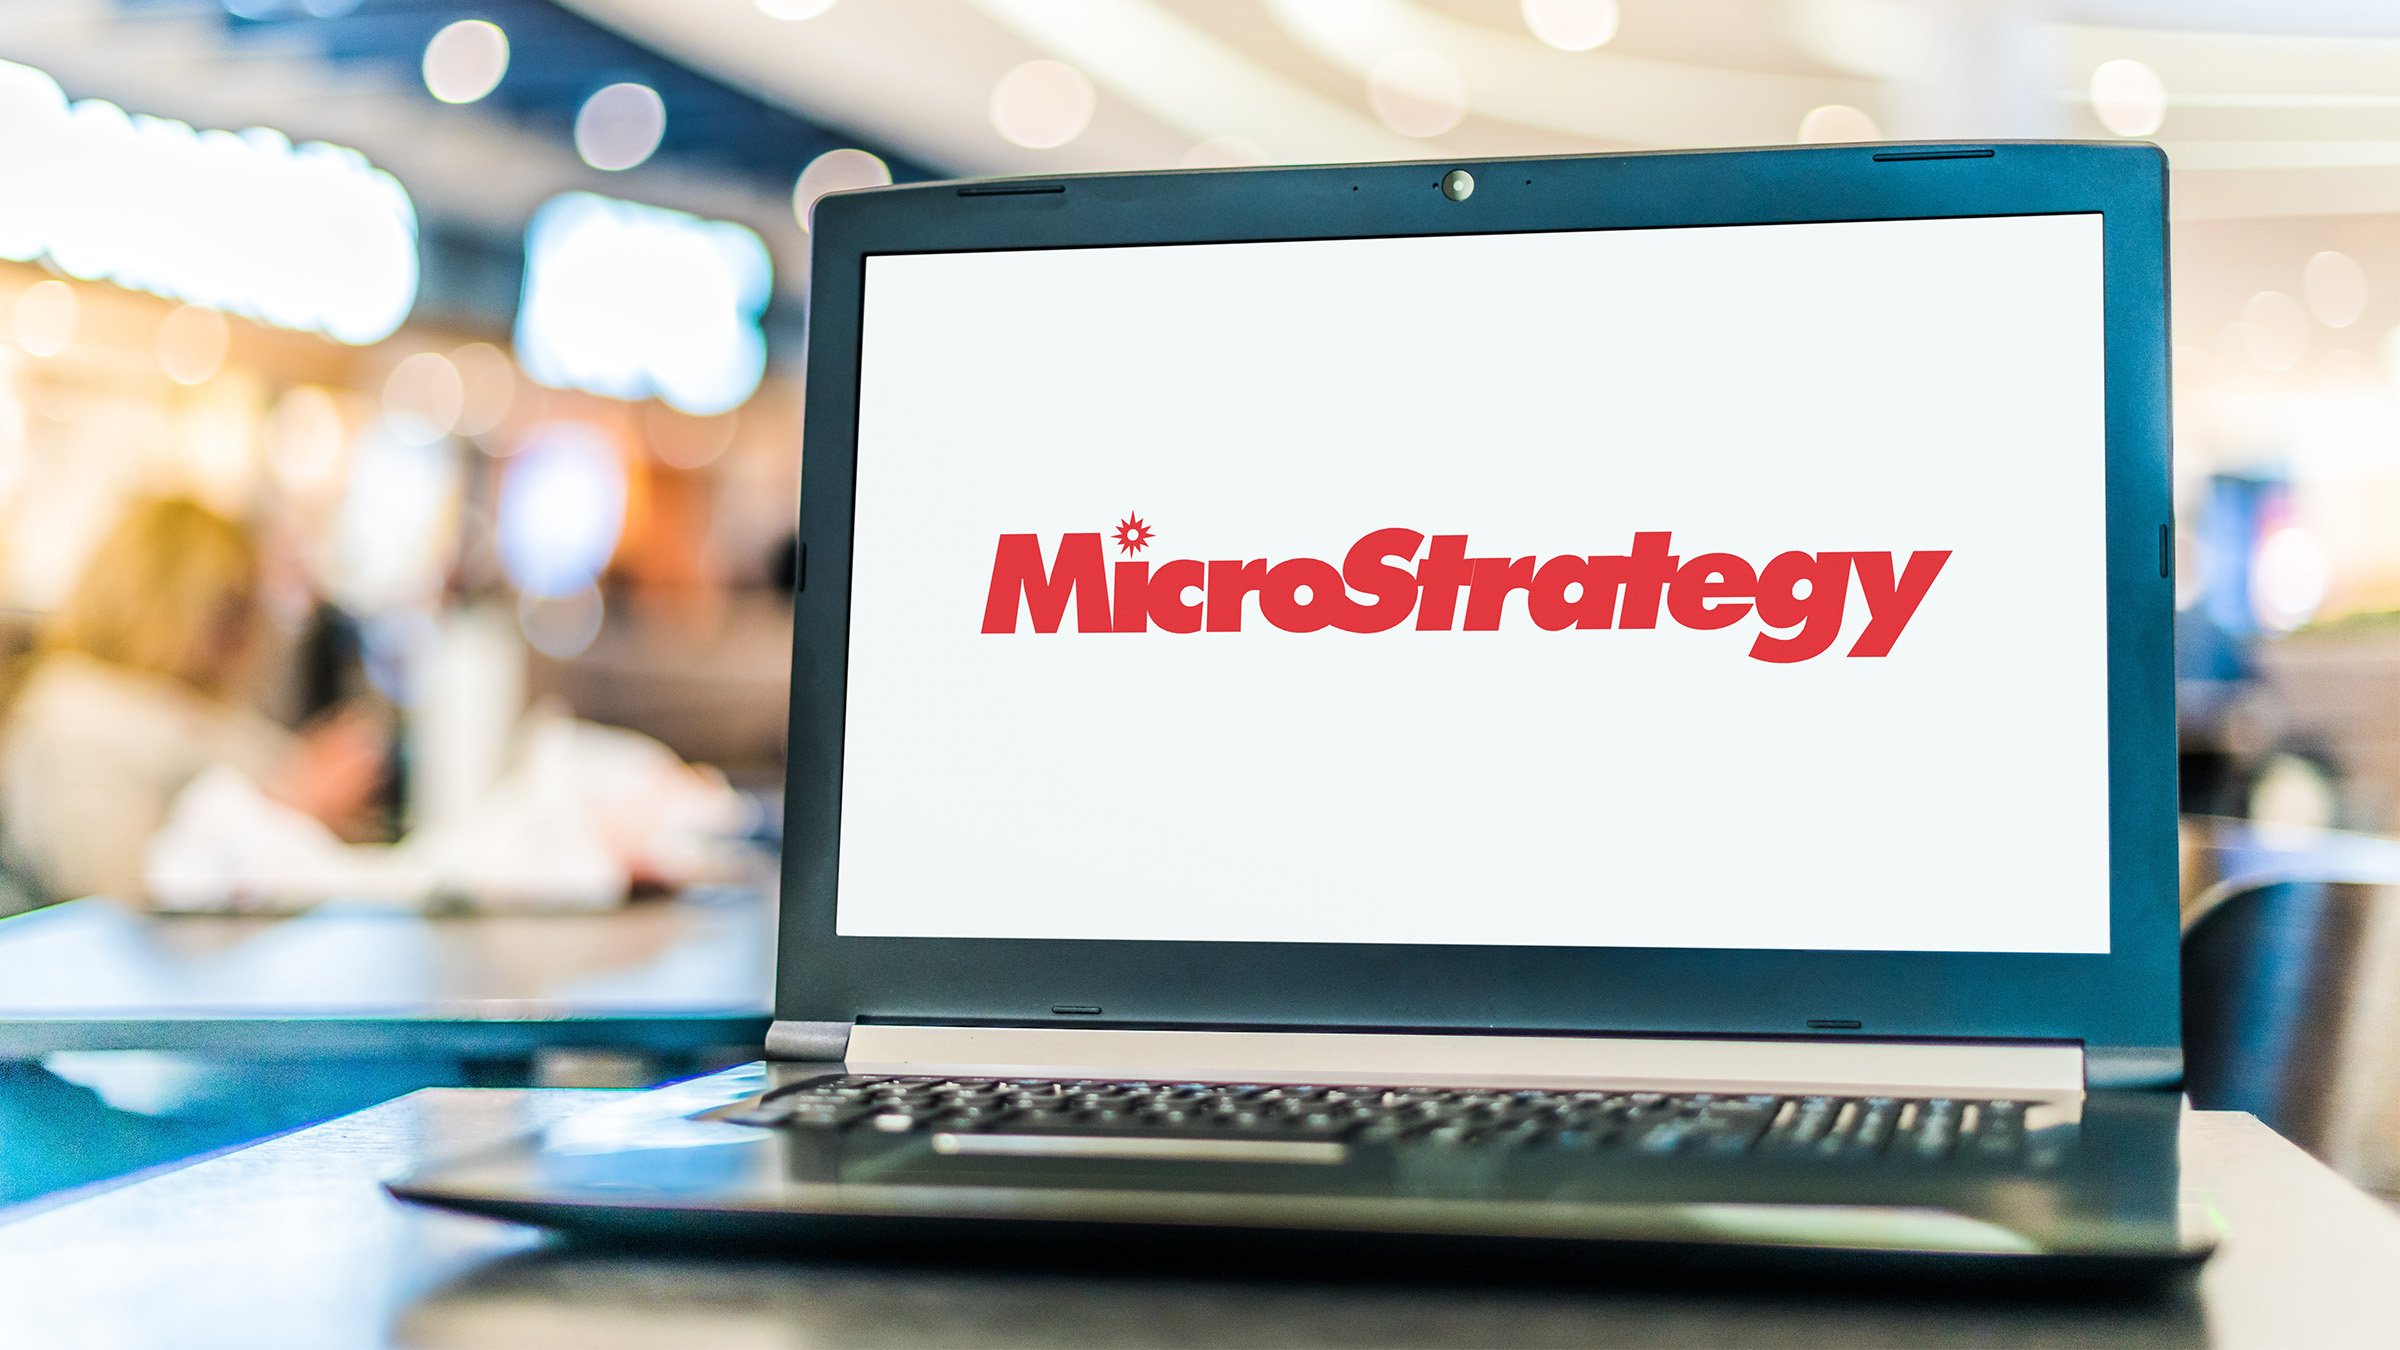 Time to Buy? MicroStrategy Stock Premium Shrinks After Bitcoin Pullback